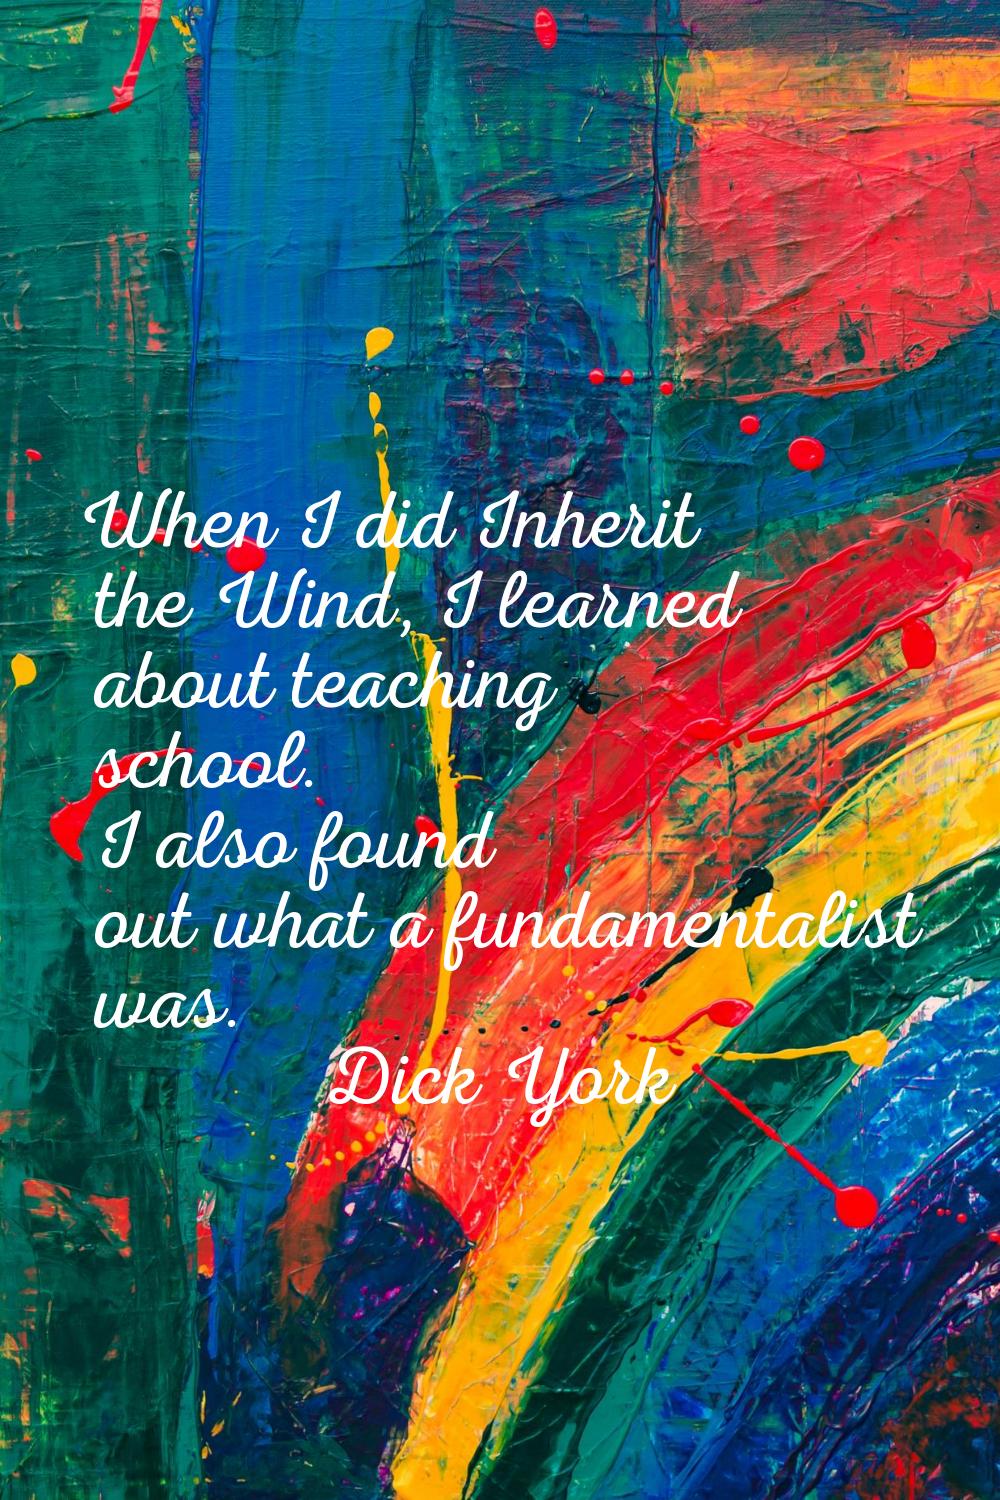 When I did Inherit the Wind, I learned about teaching school. I also found out what a fundamentalis